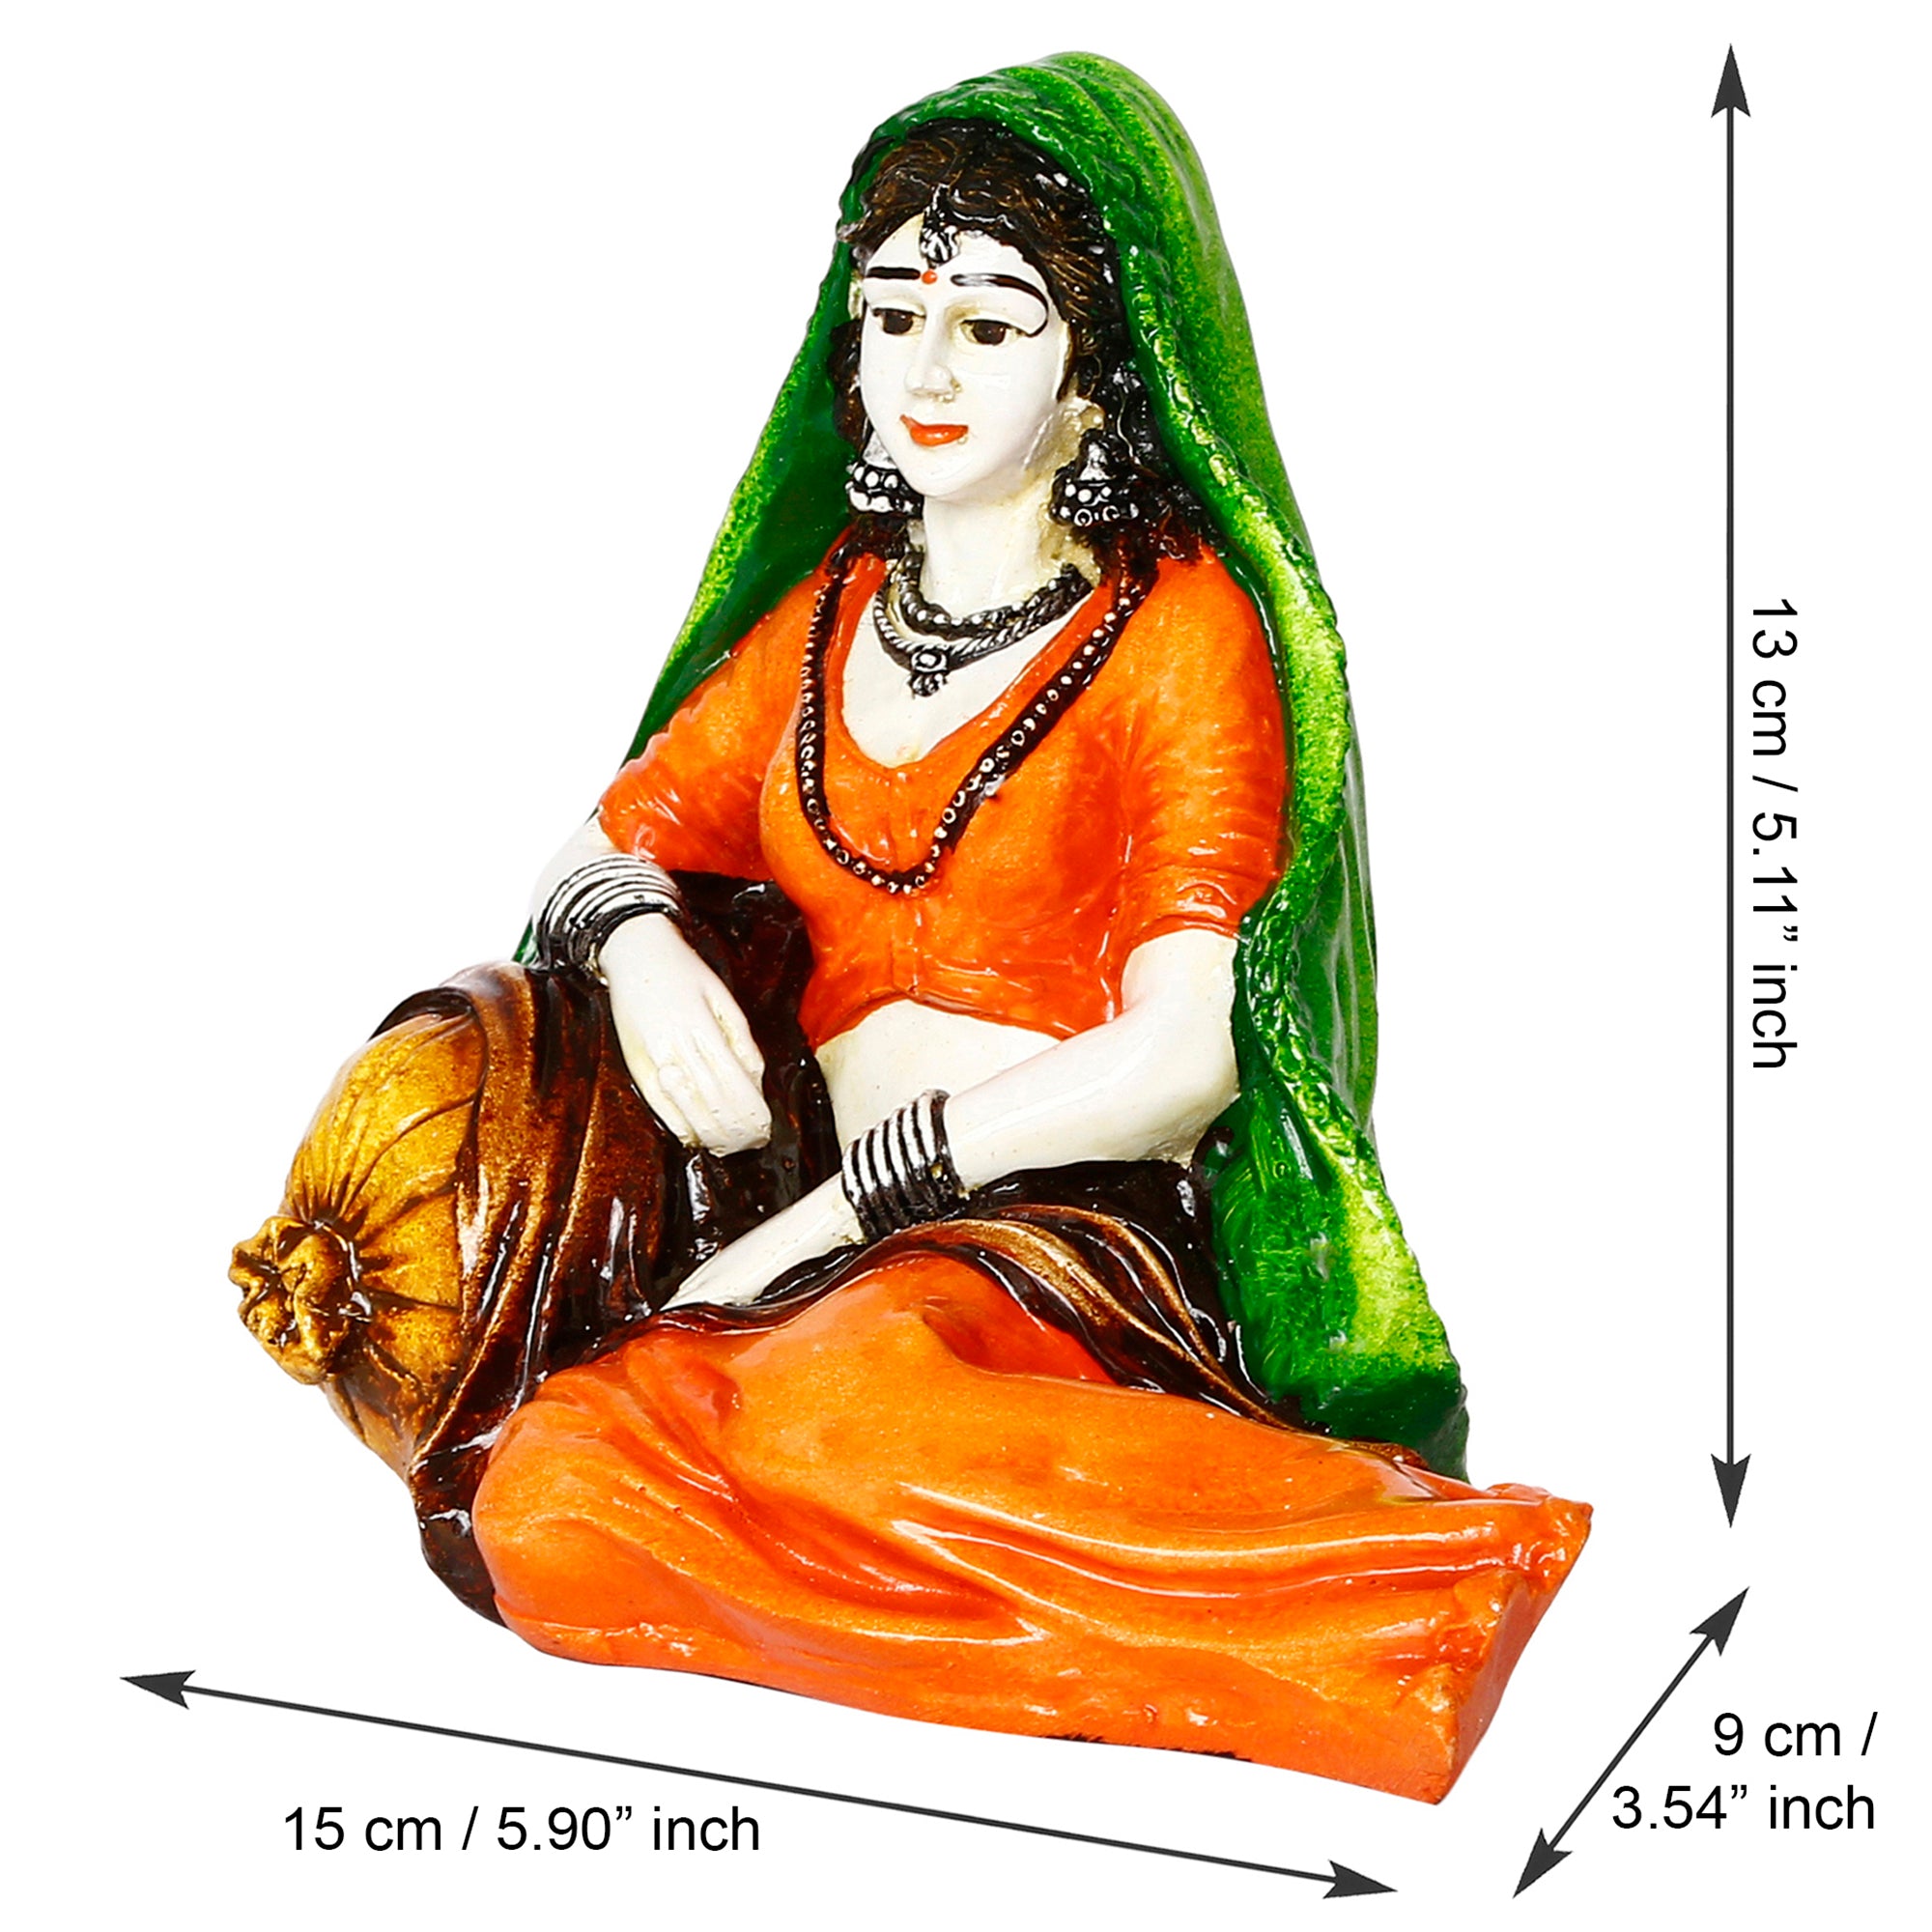 Resting Rajasthani Lady Handcrafted Decorative Polyresin Showpiece 3